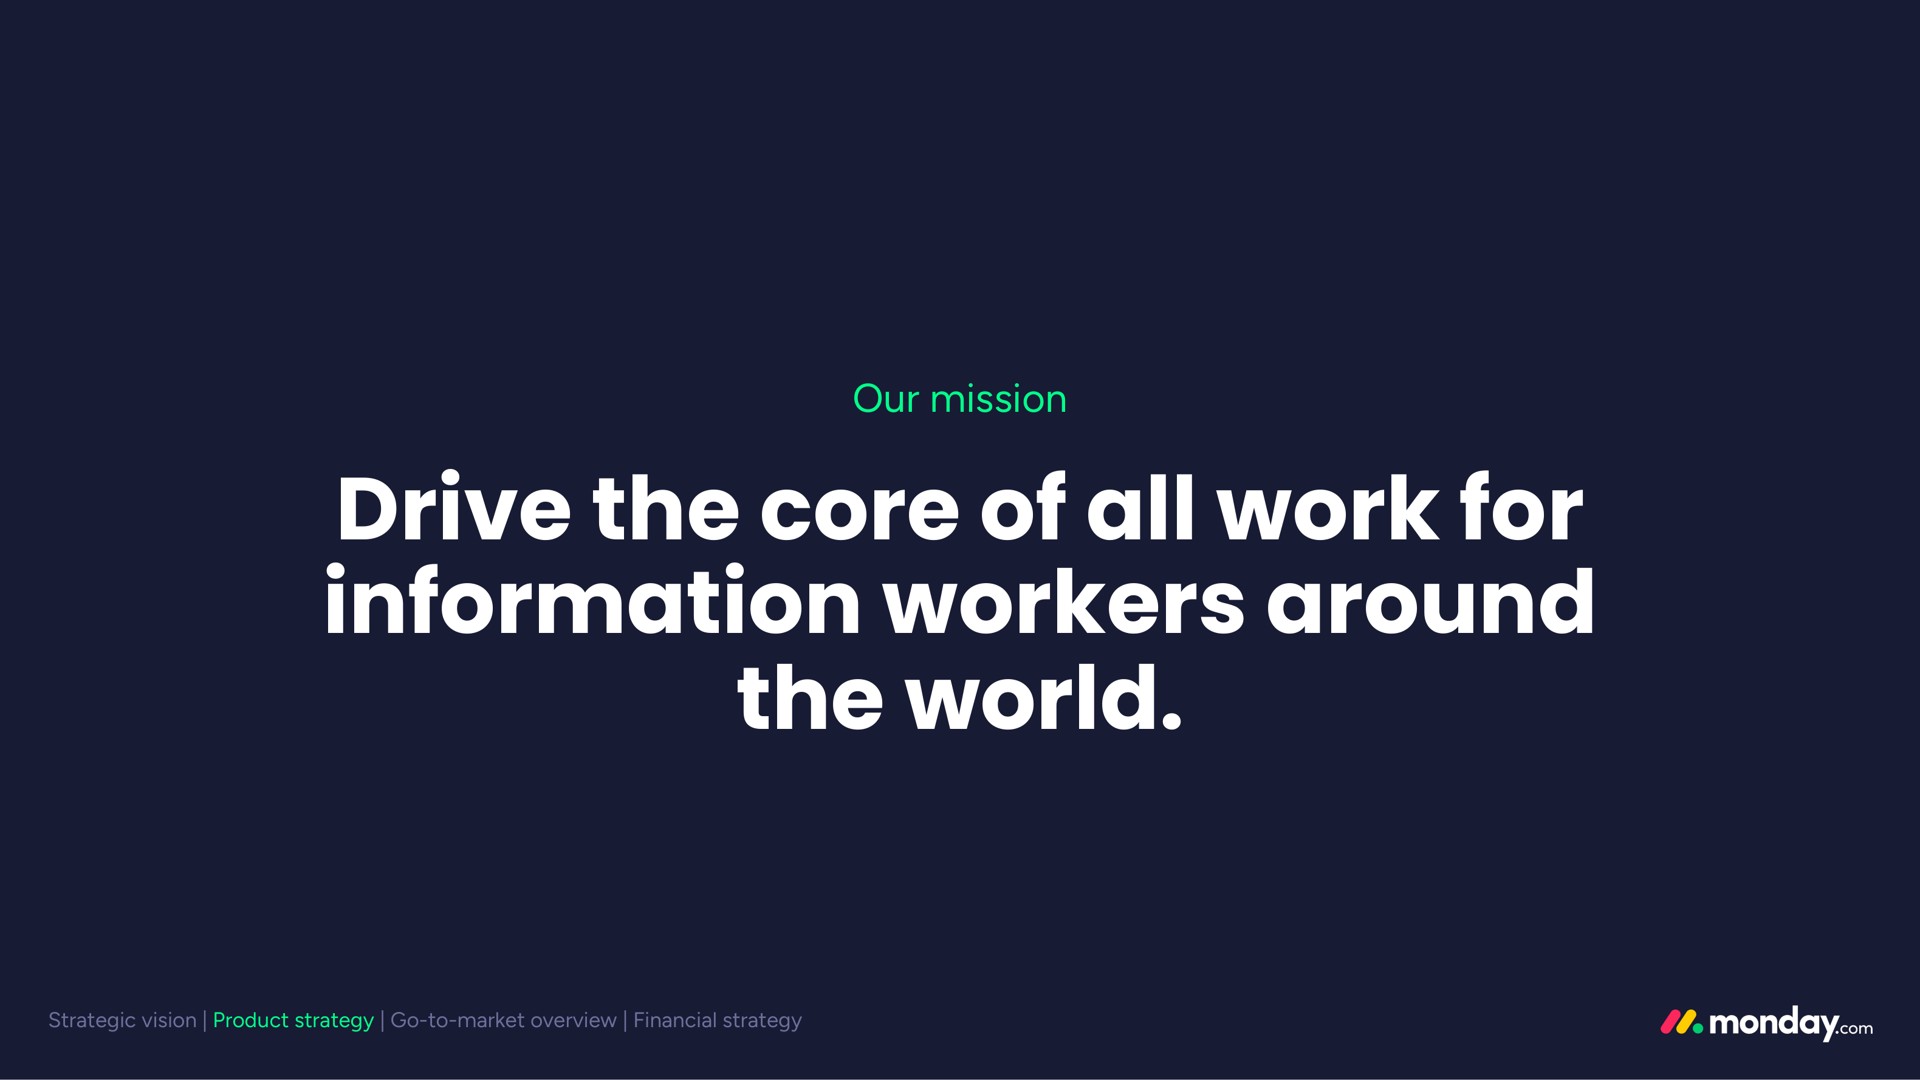 drive the core of all work for information workers around the world | monday.com